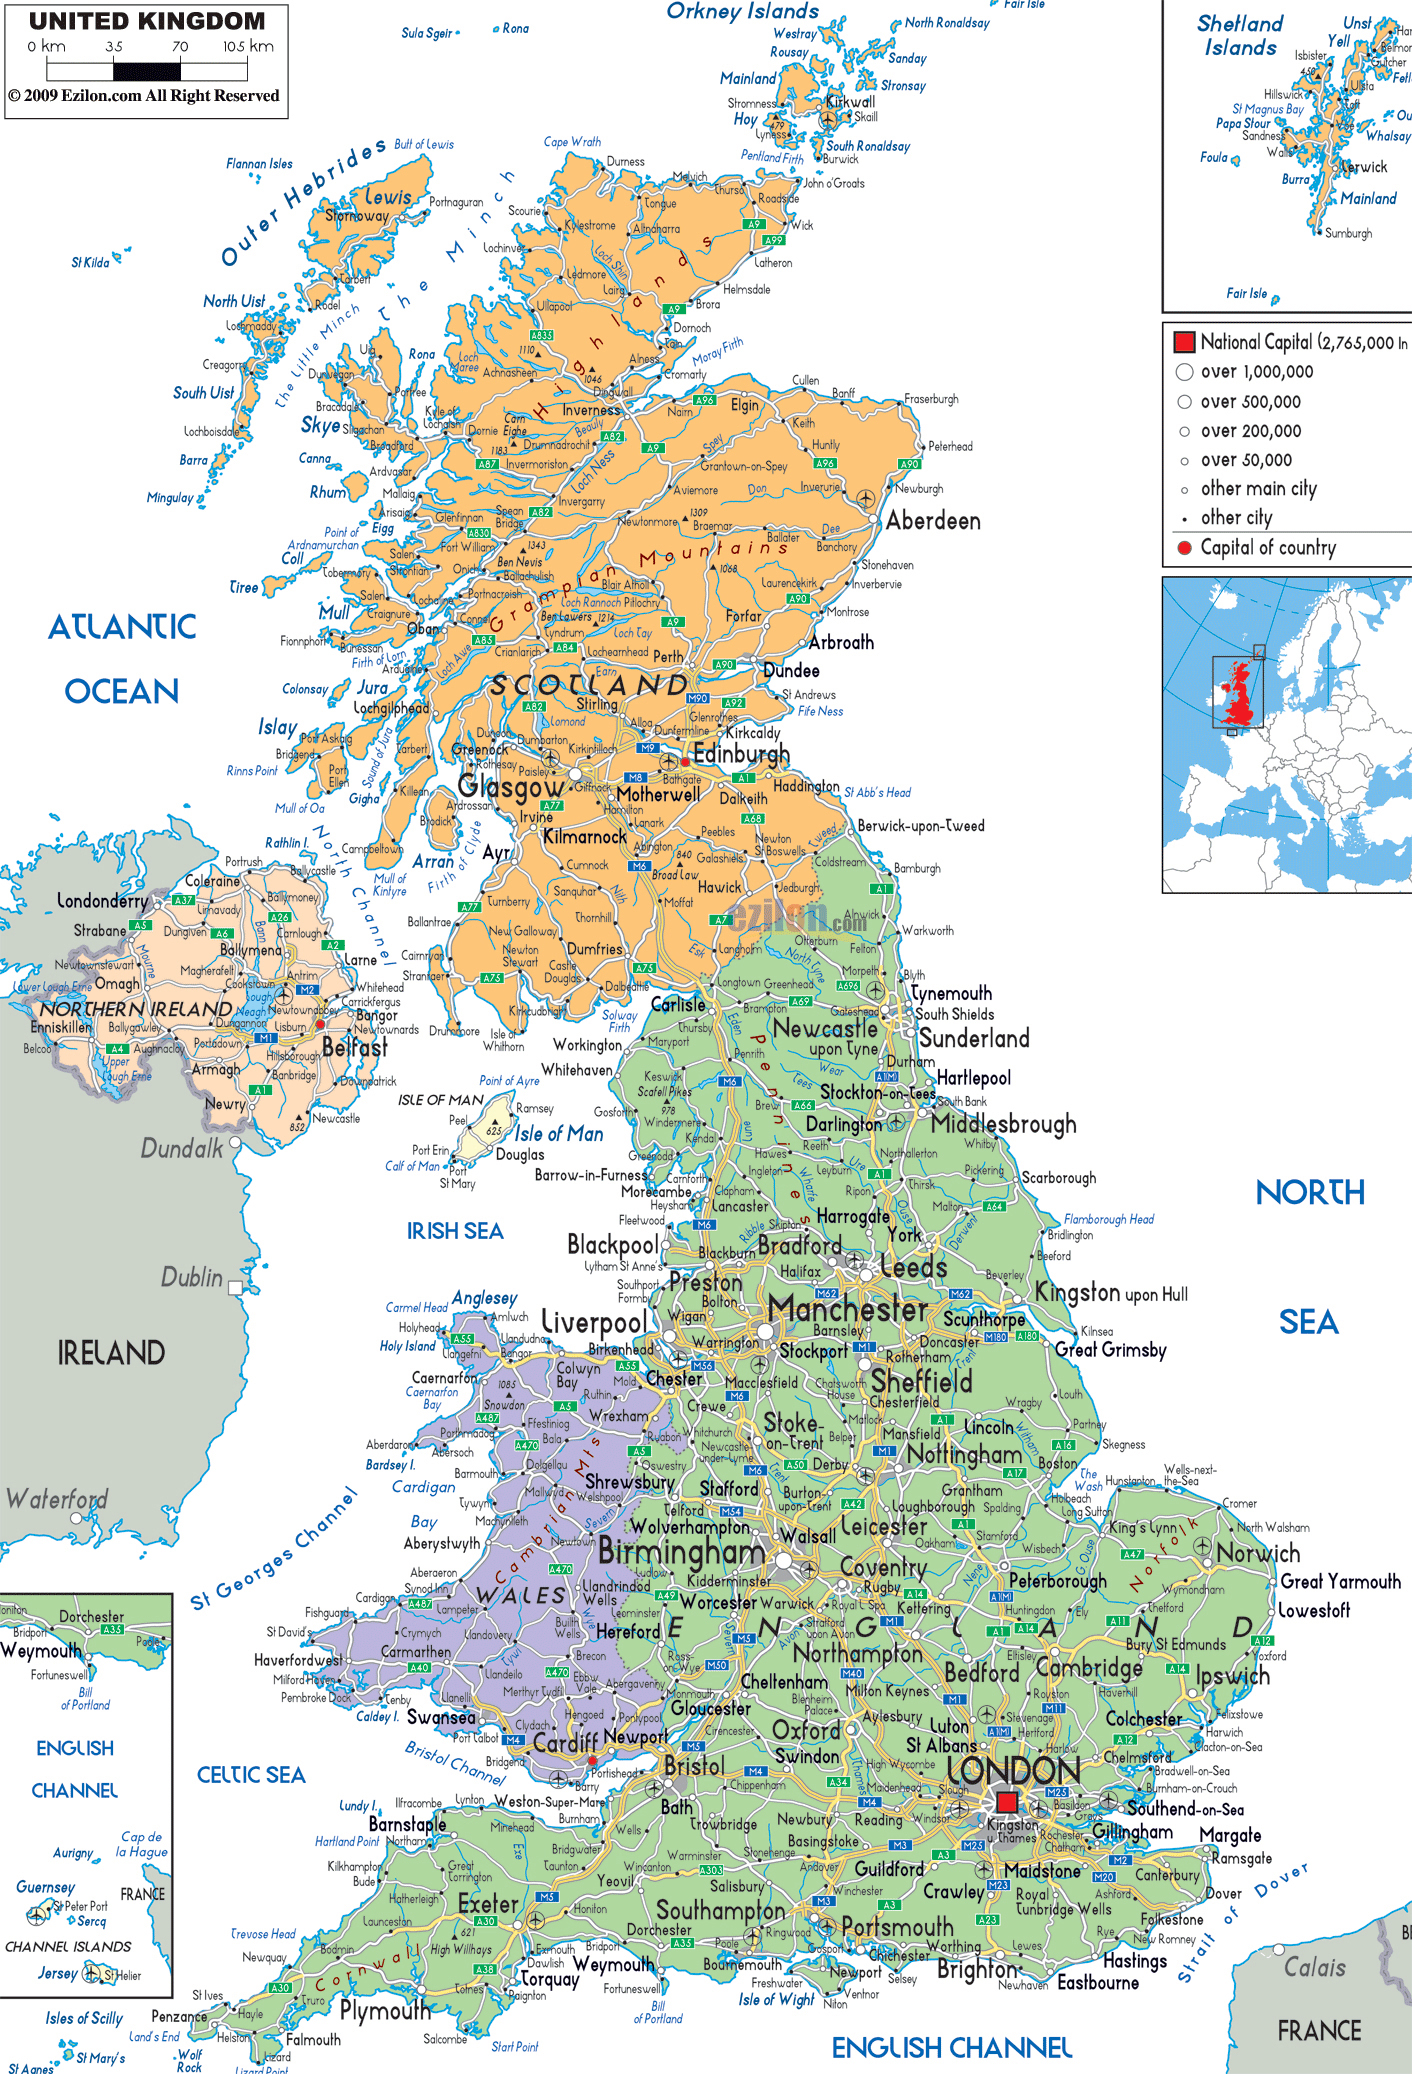 large-detailed-political-and-administrative-map-of-united-kingdom-with